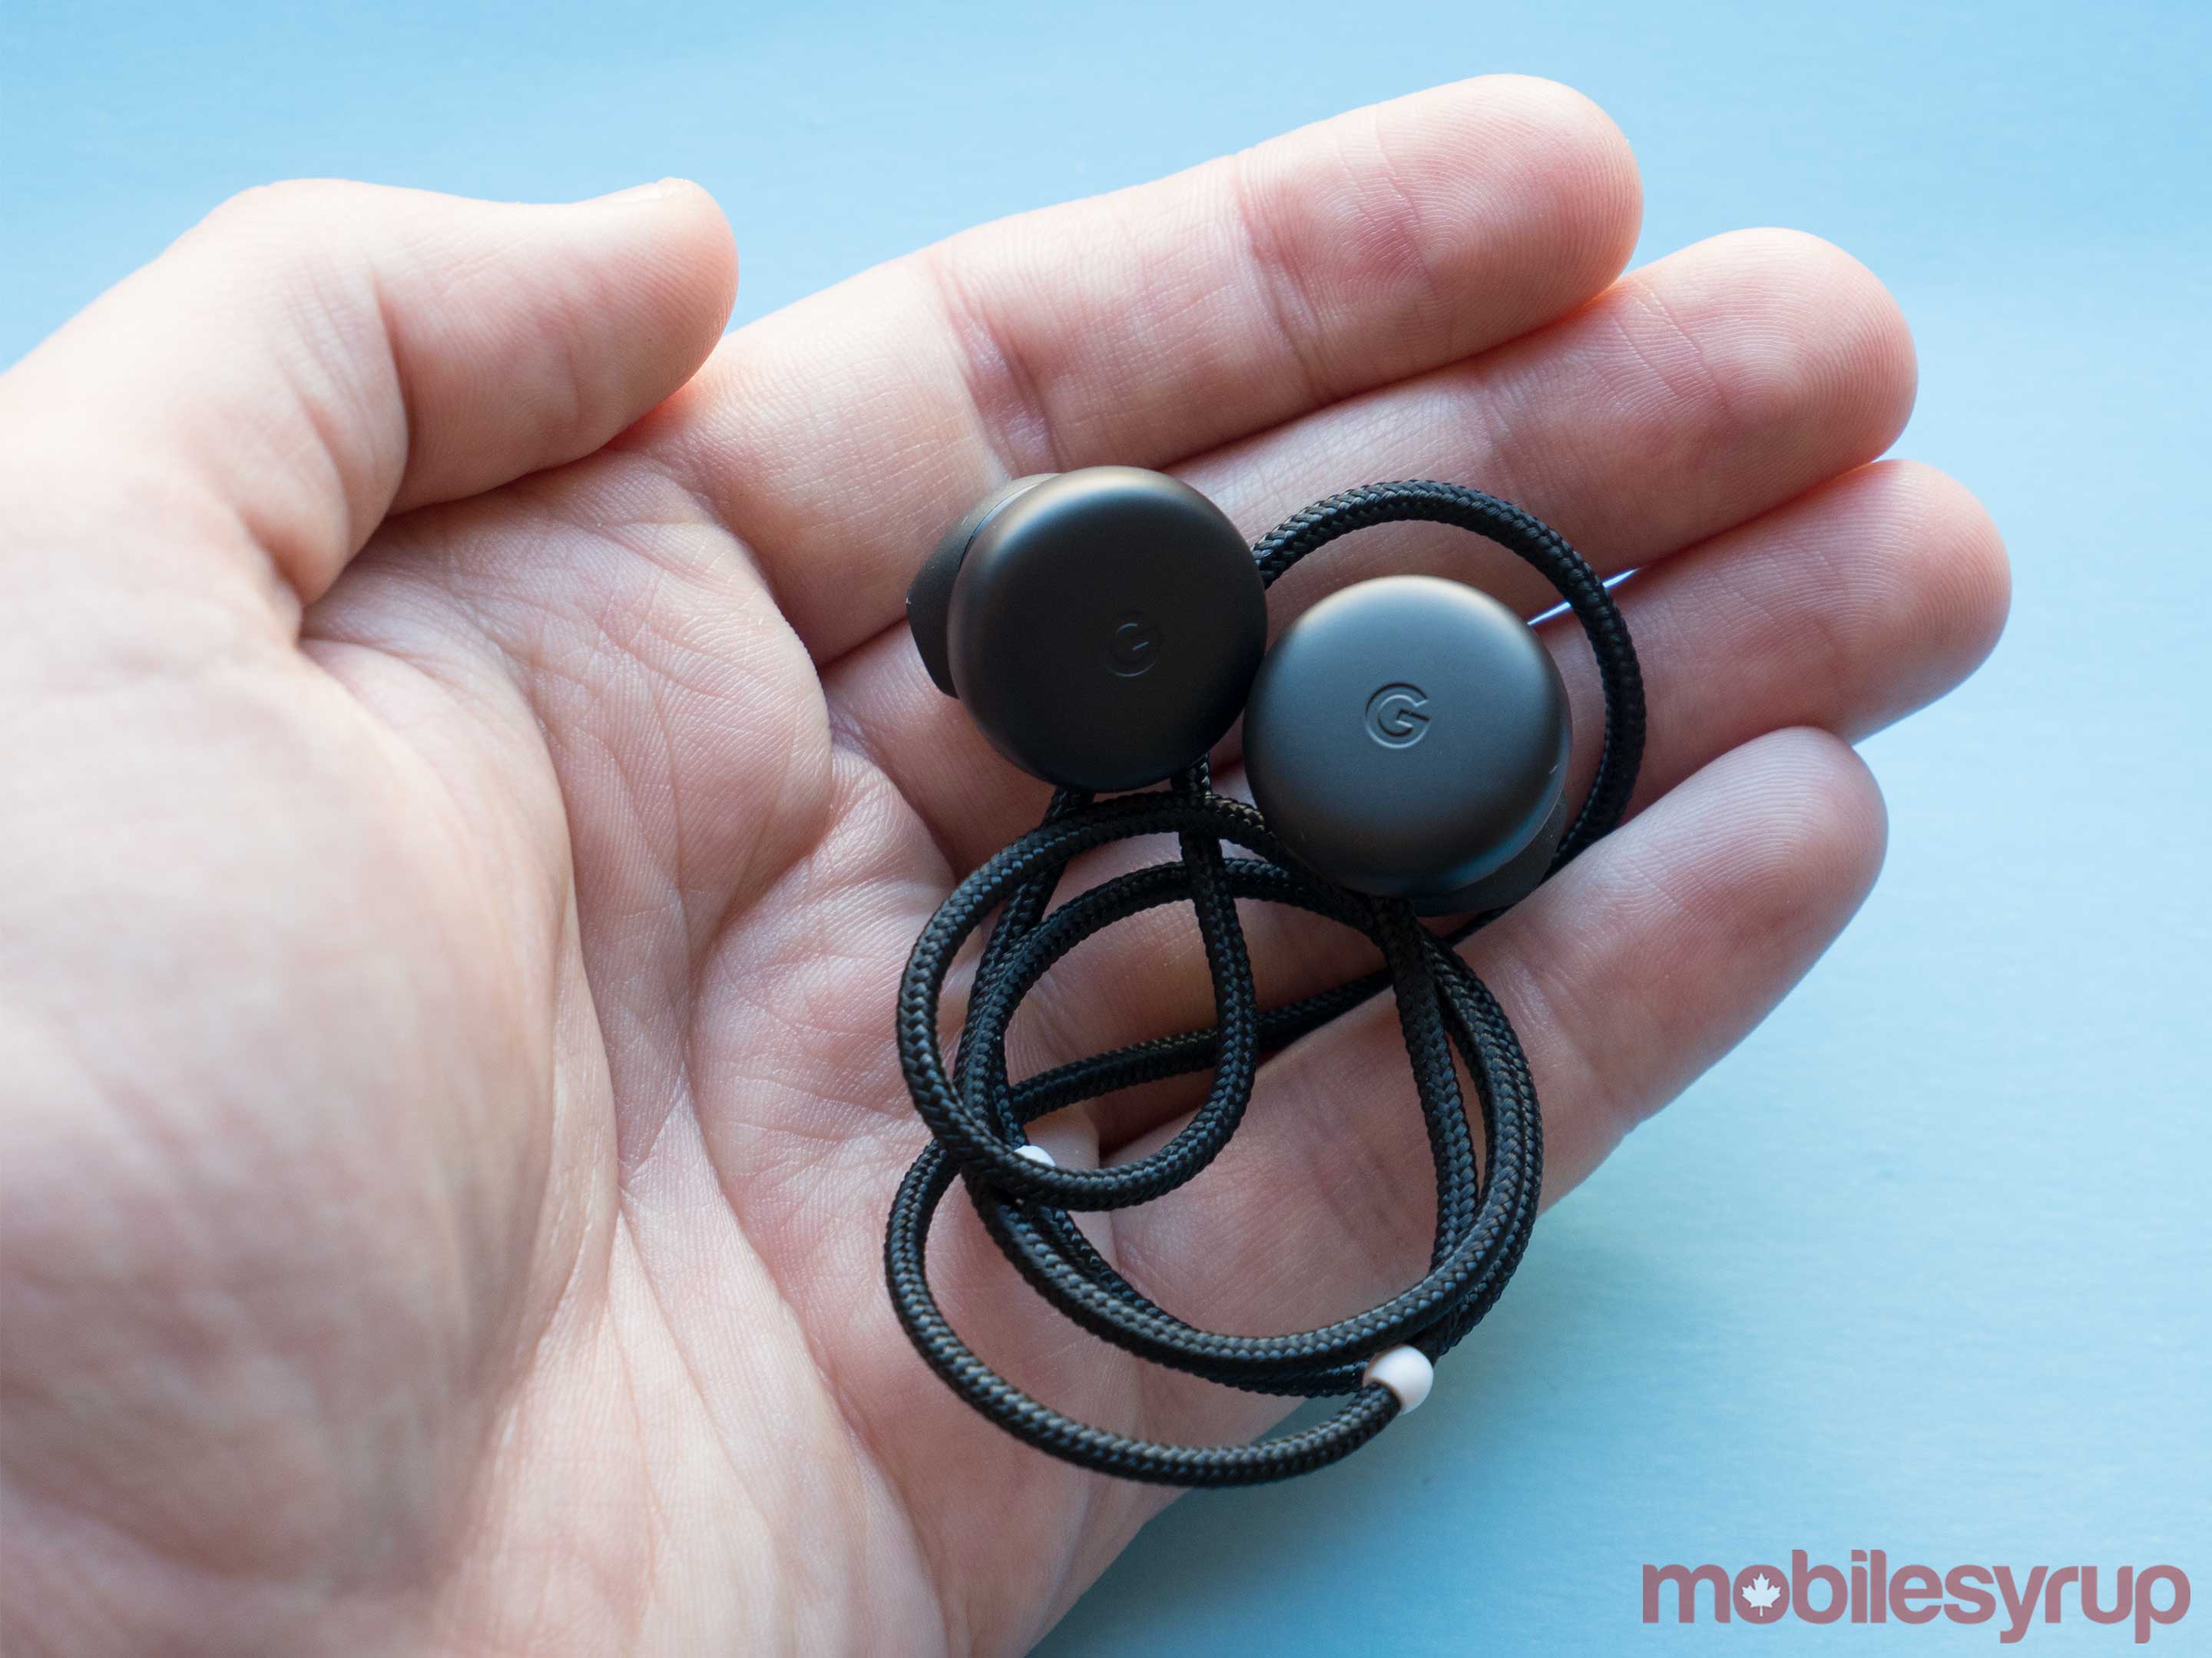 Pixel Buds sitting in a hand